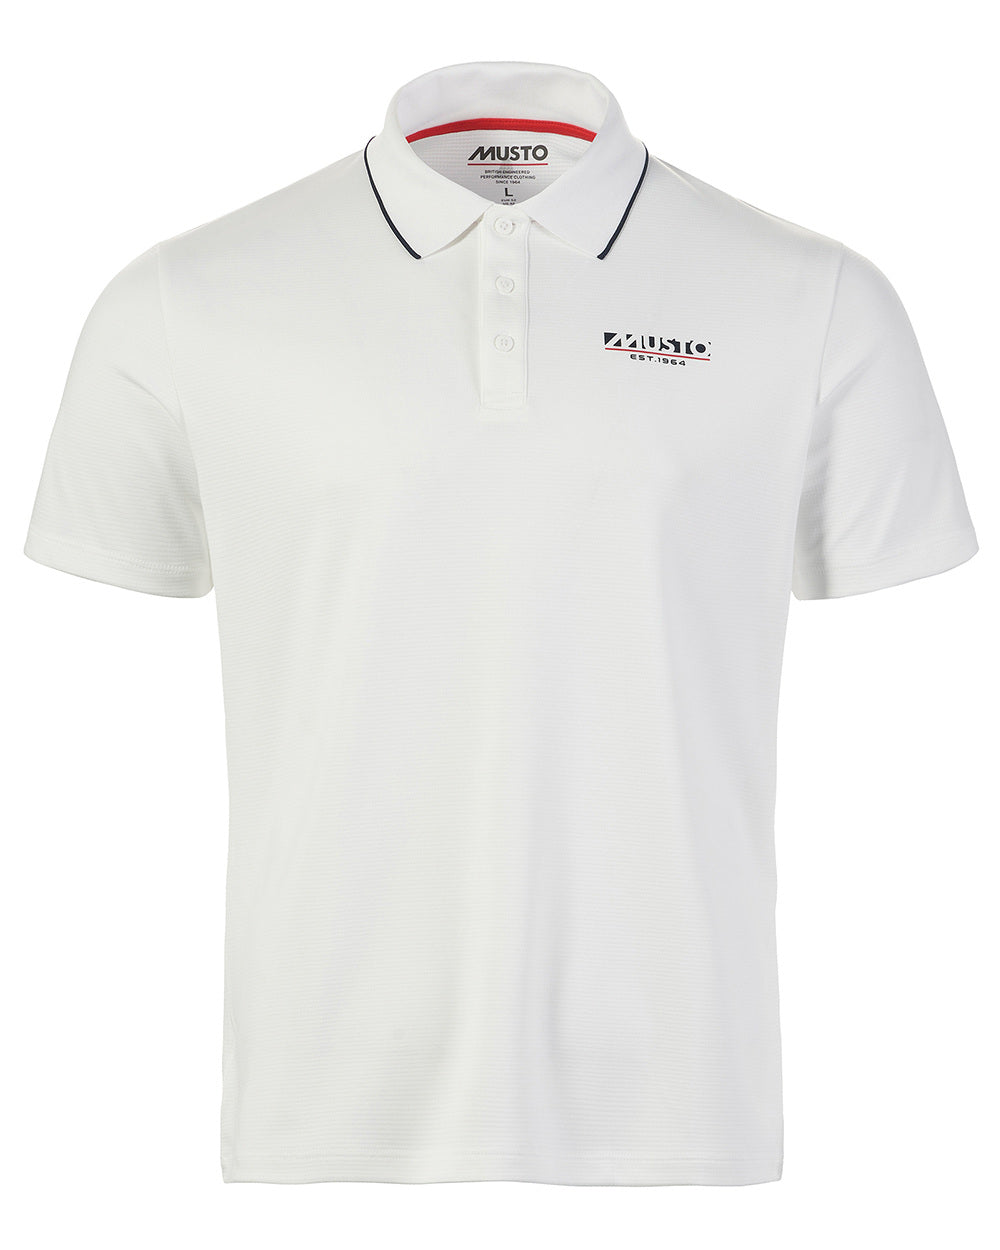 White Coloured Musto Mens 1964 Short Sleeve Polo Shirt On A White Background 